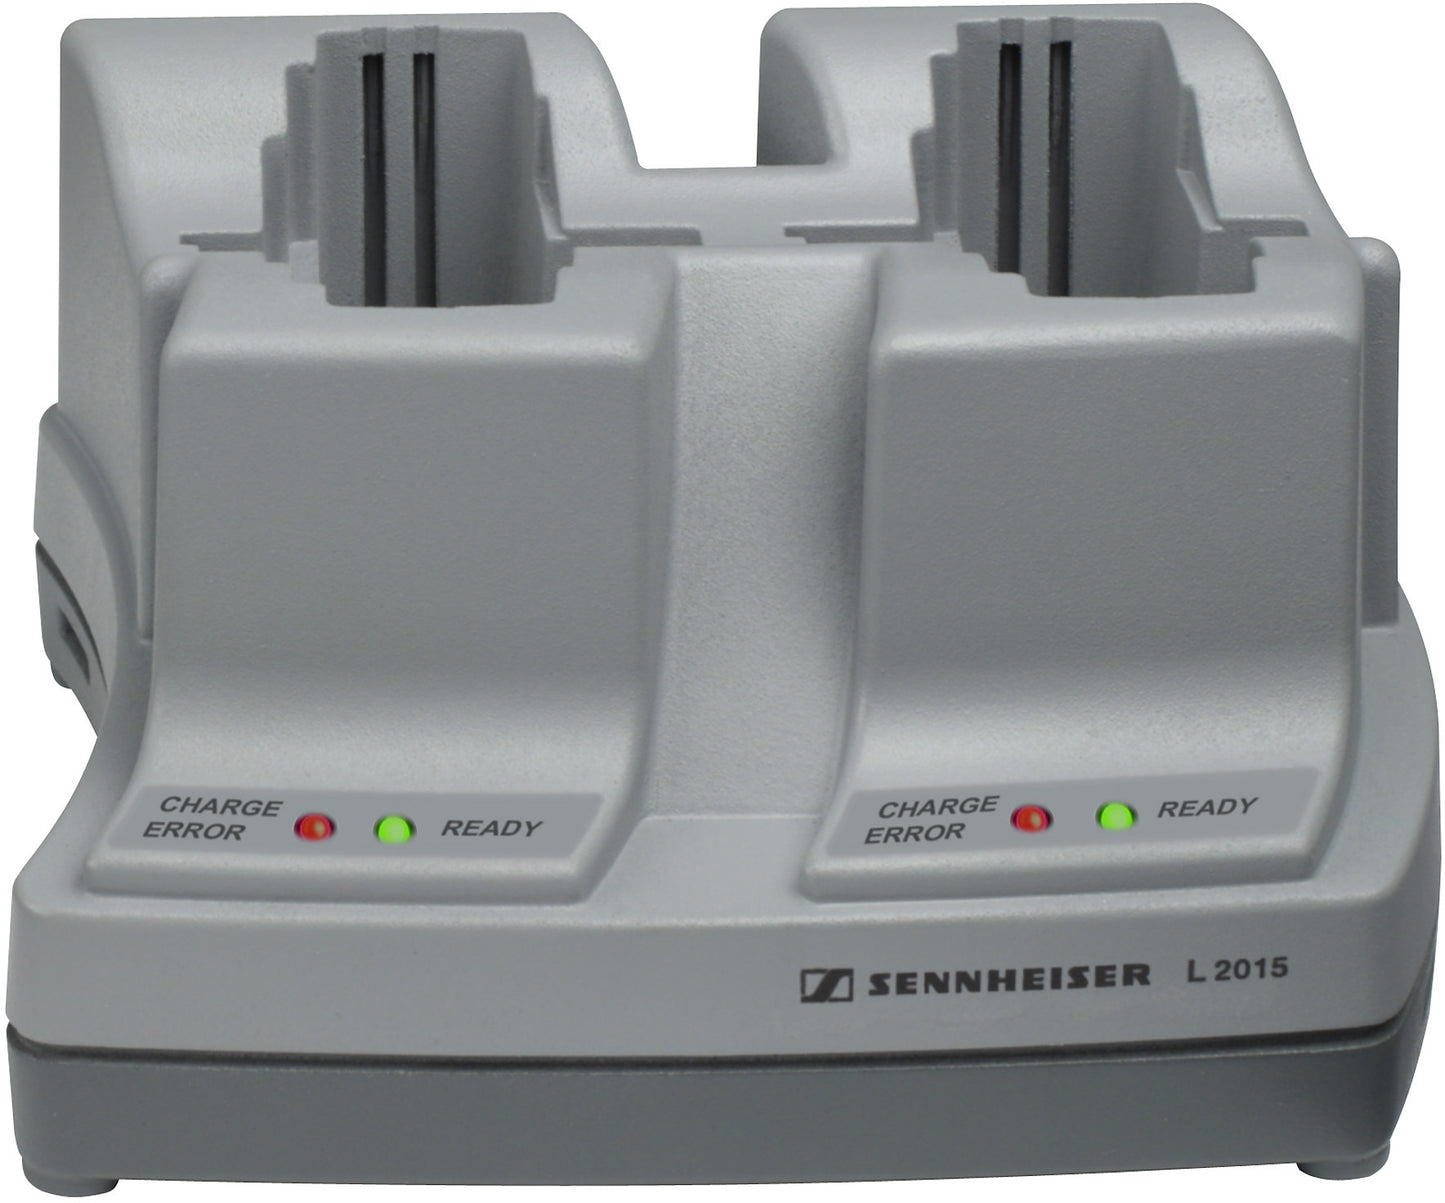 Sennheiser L2015 Charging Station for BA2015G2 Rechargeable (New Factory Repack) 08728